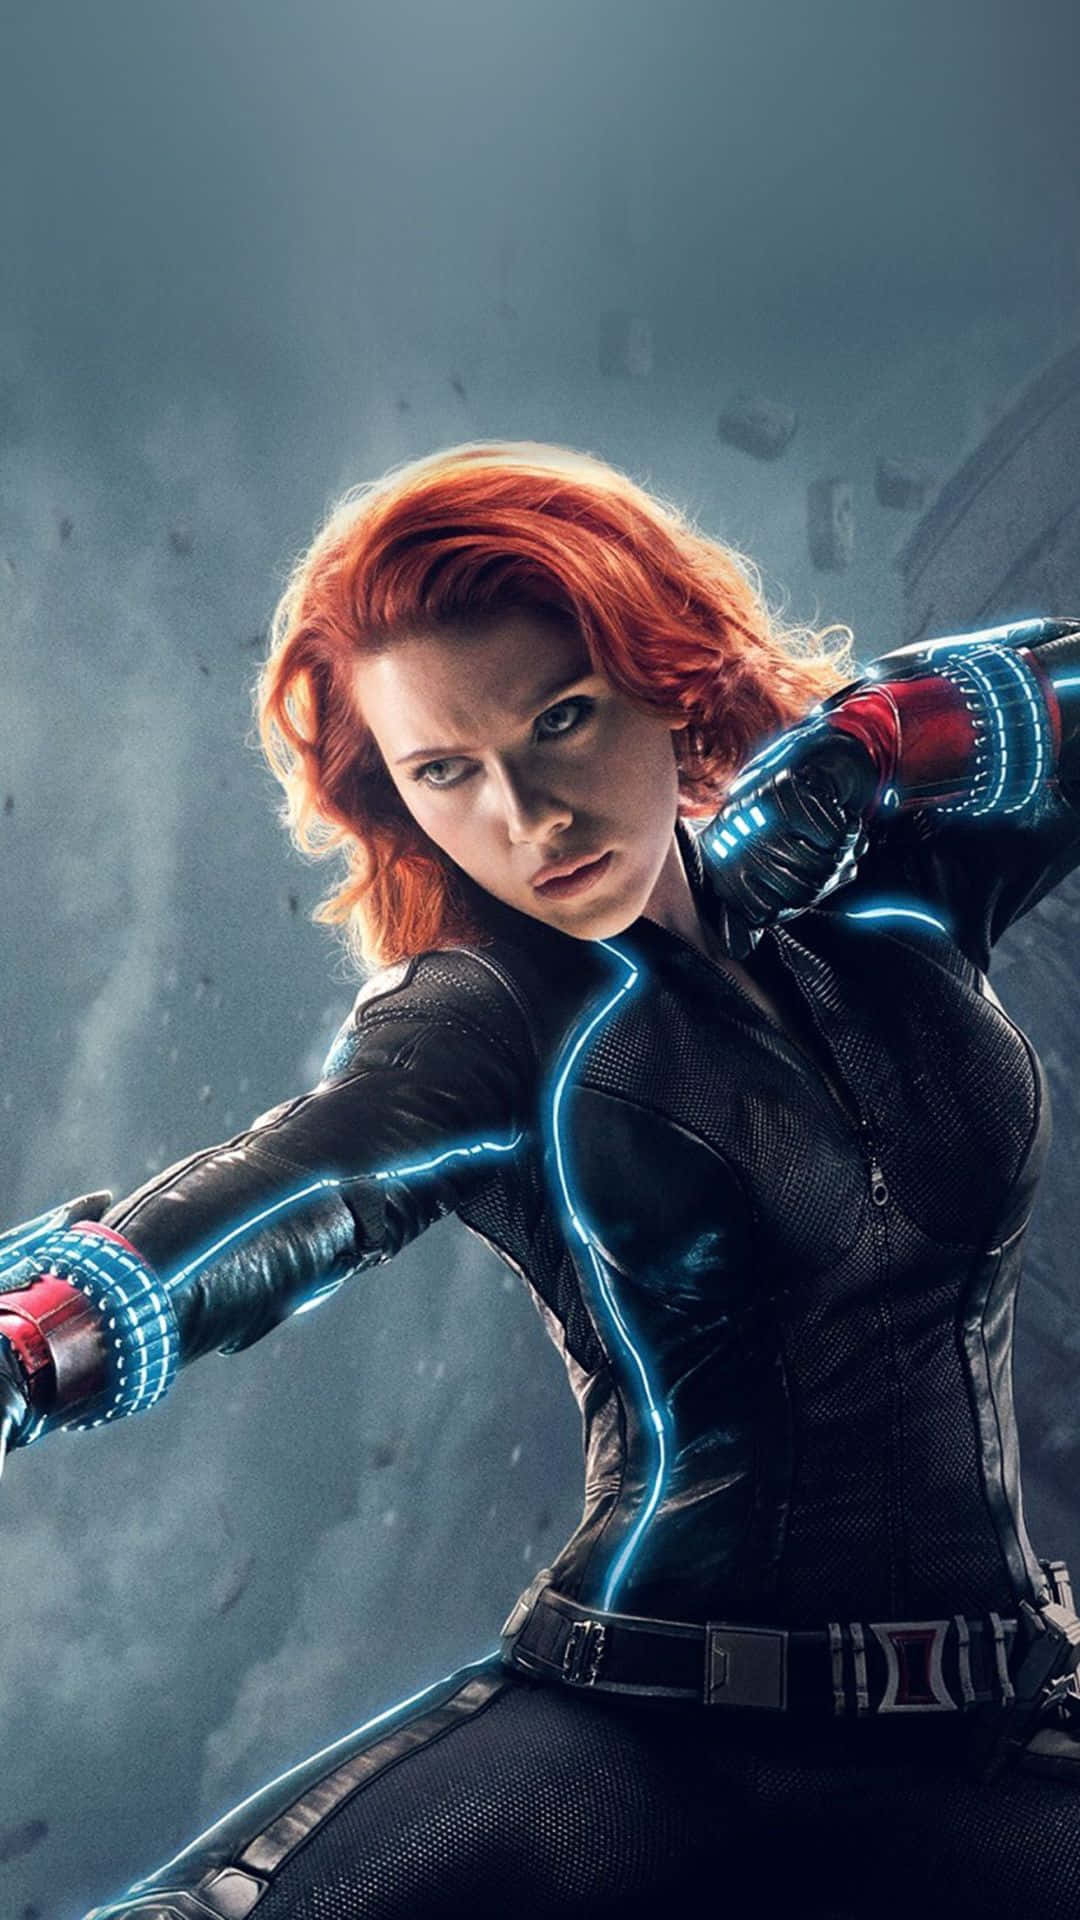 Android Marvel's Avengers Black Widow Fighting Stance Background